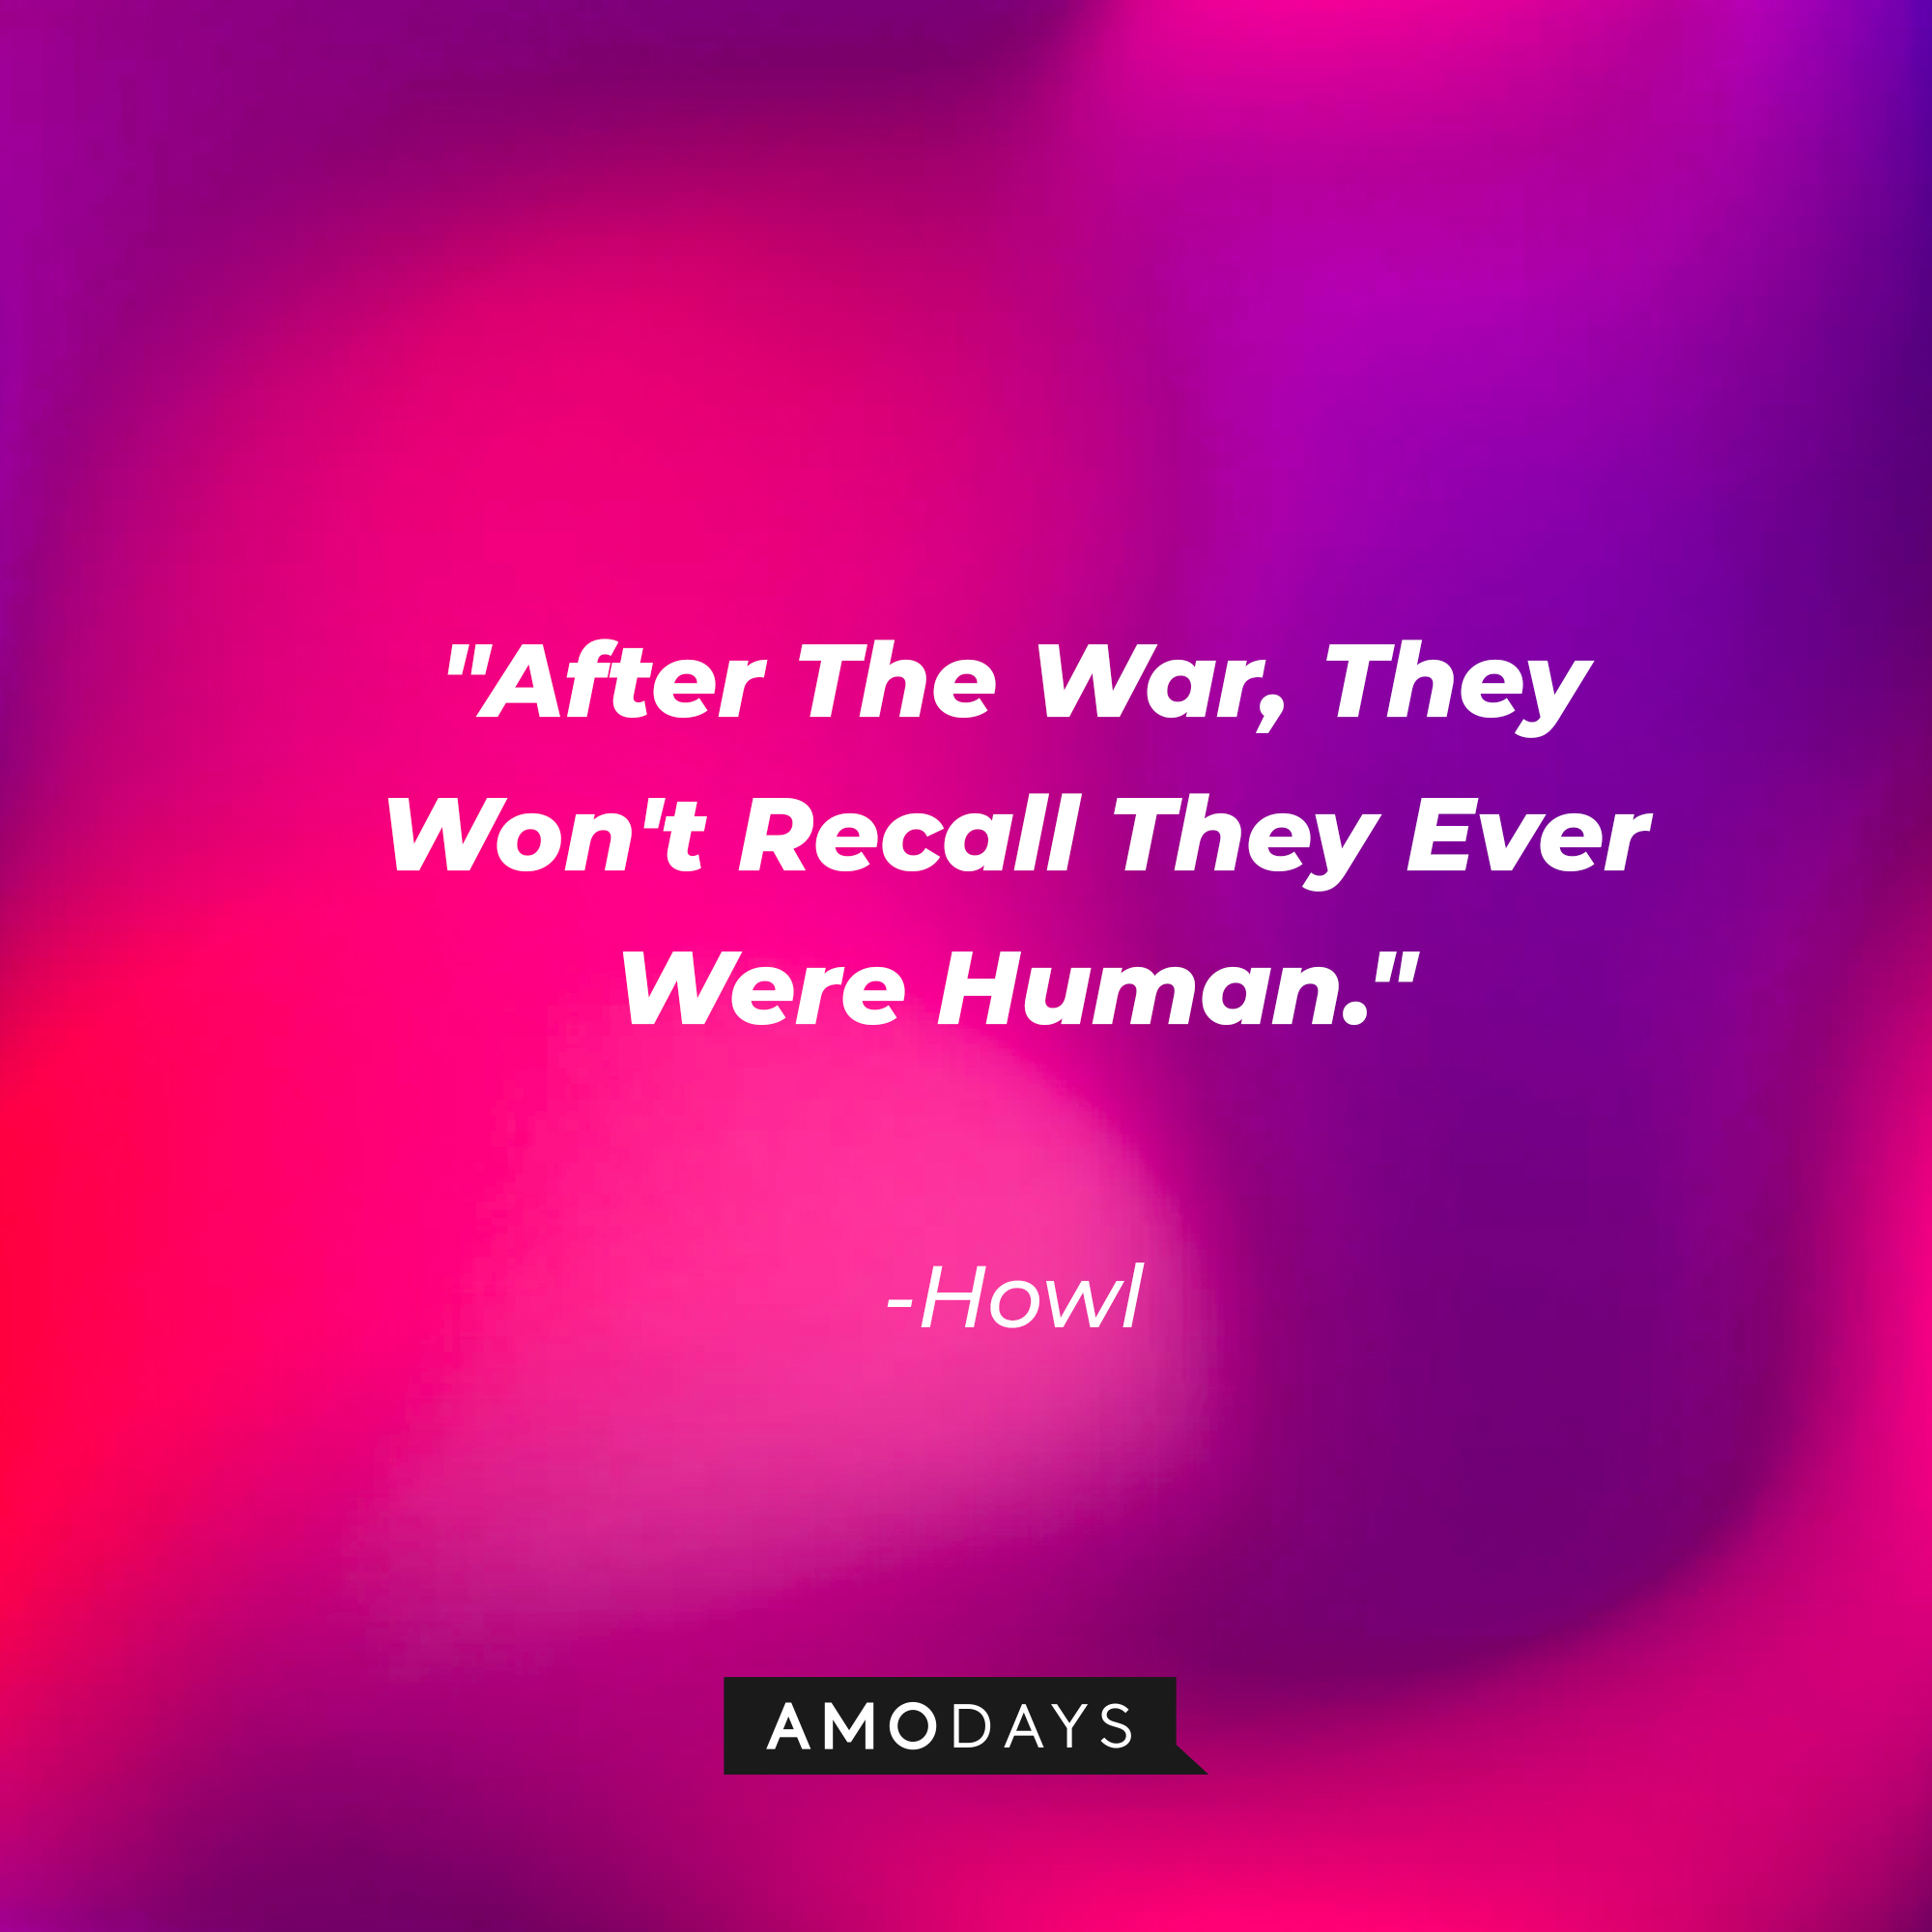 Howl's quote: "After The War, They Won't Recall They Ever Were Human." | Source: Amodays